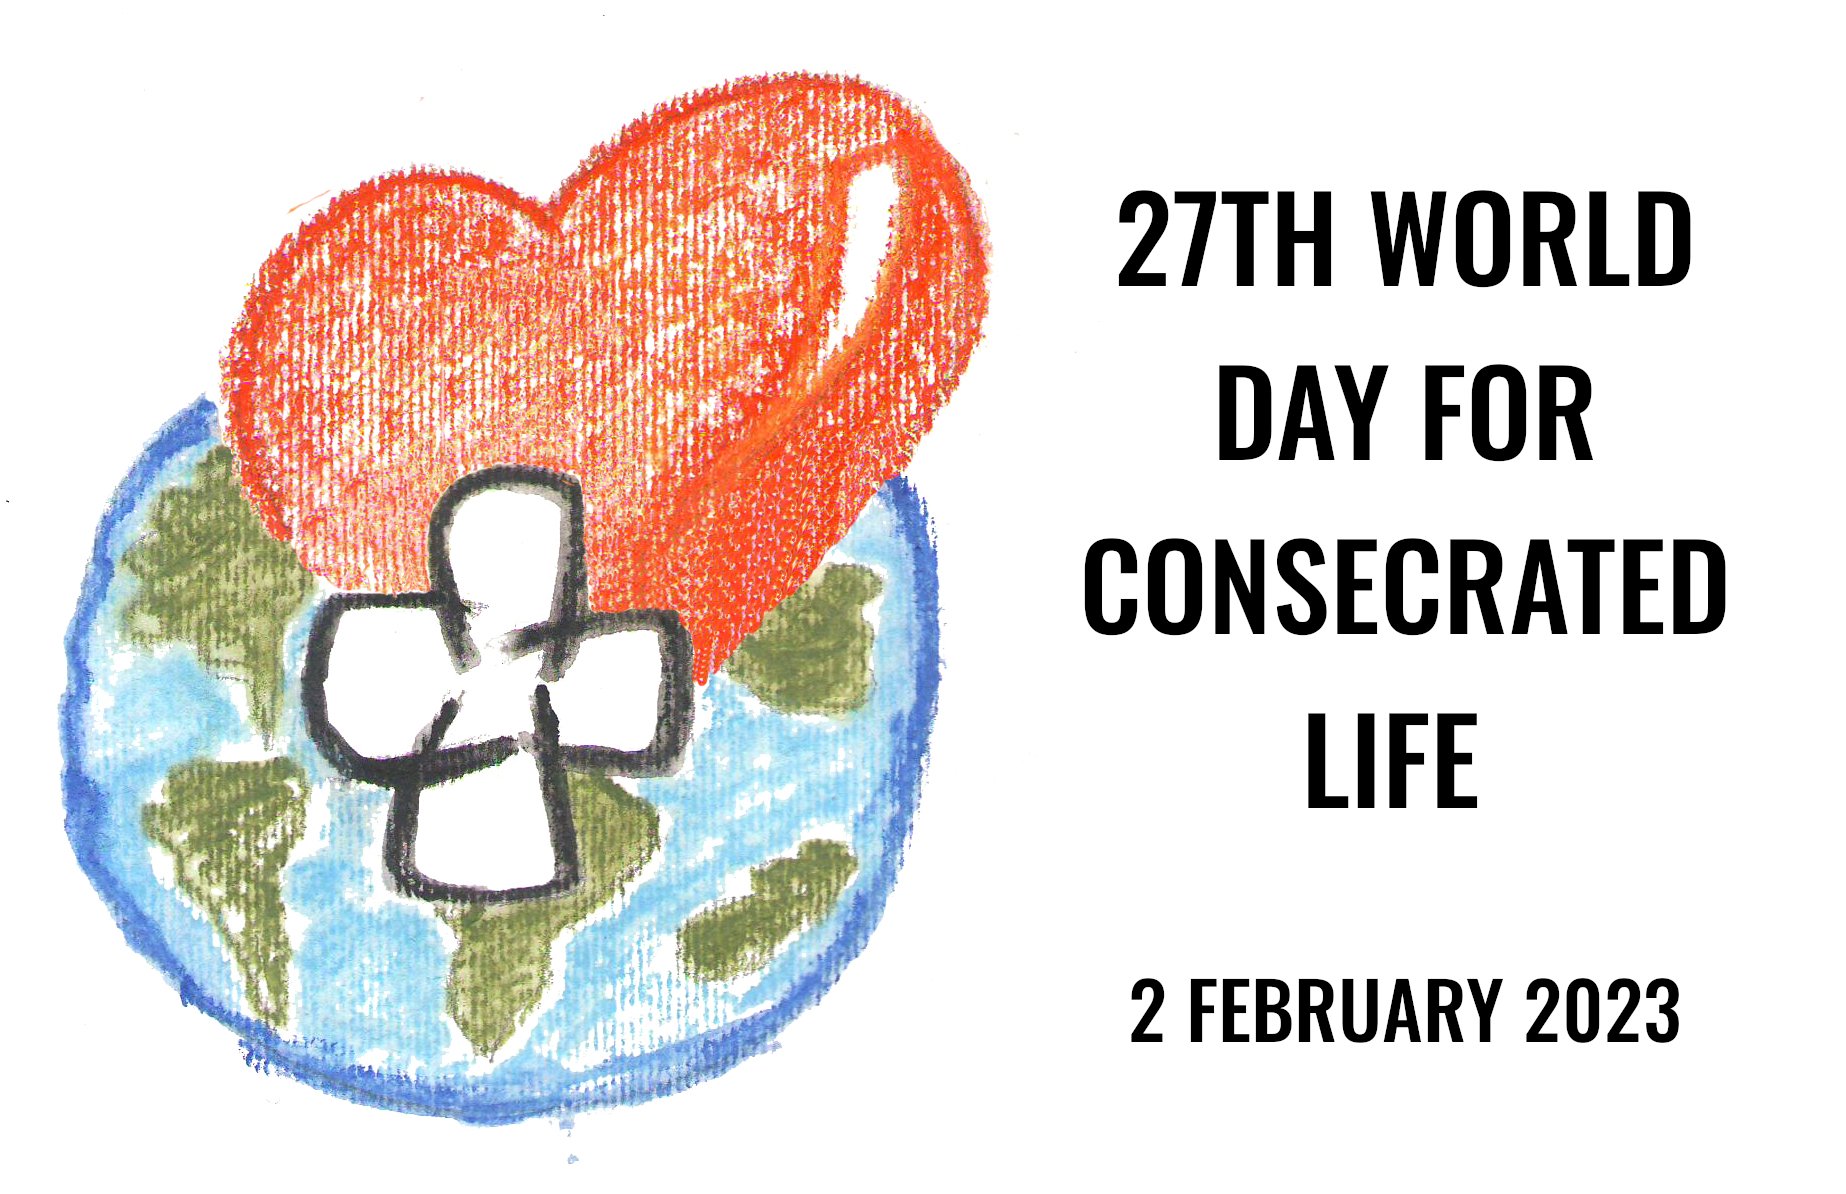 World day for consecrated life